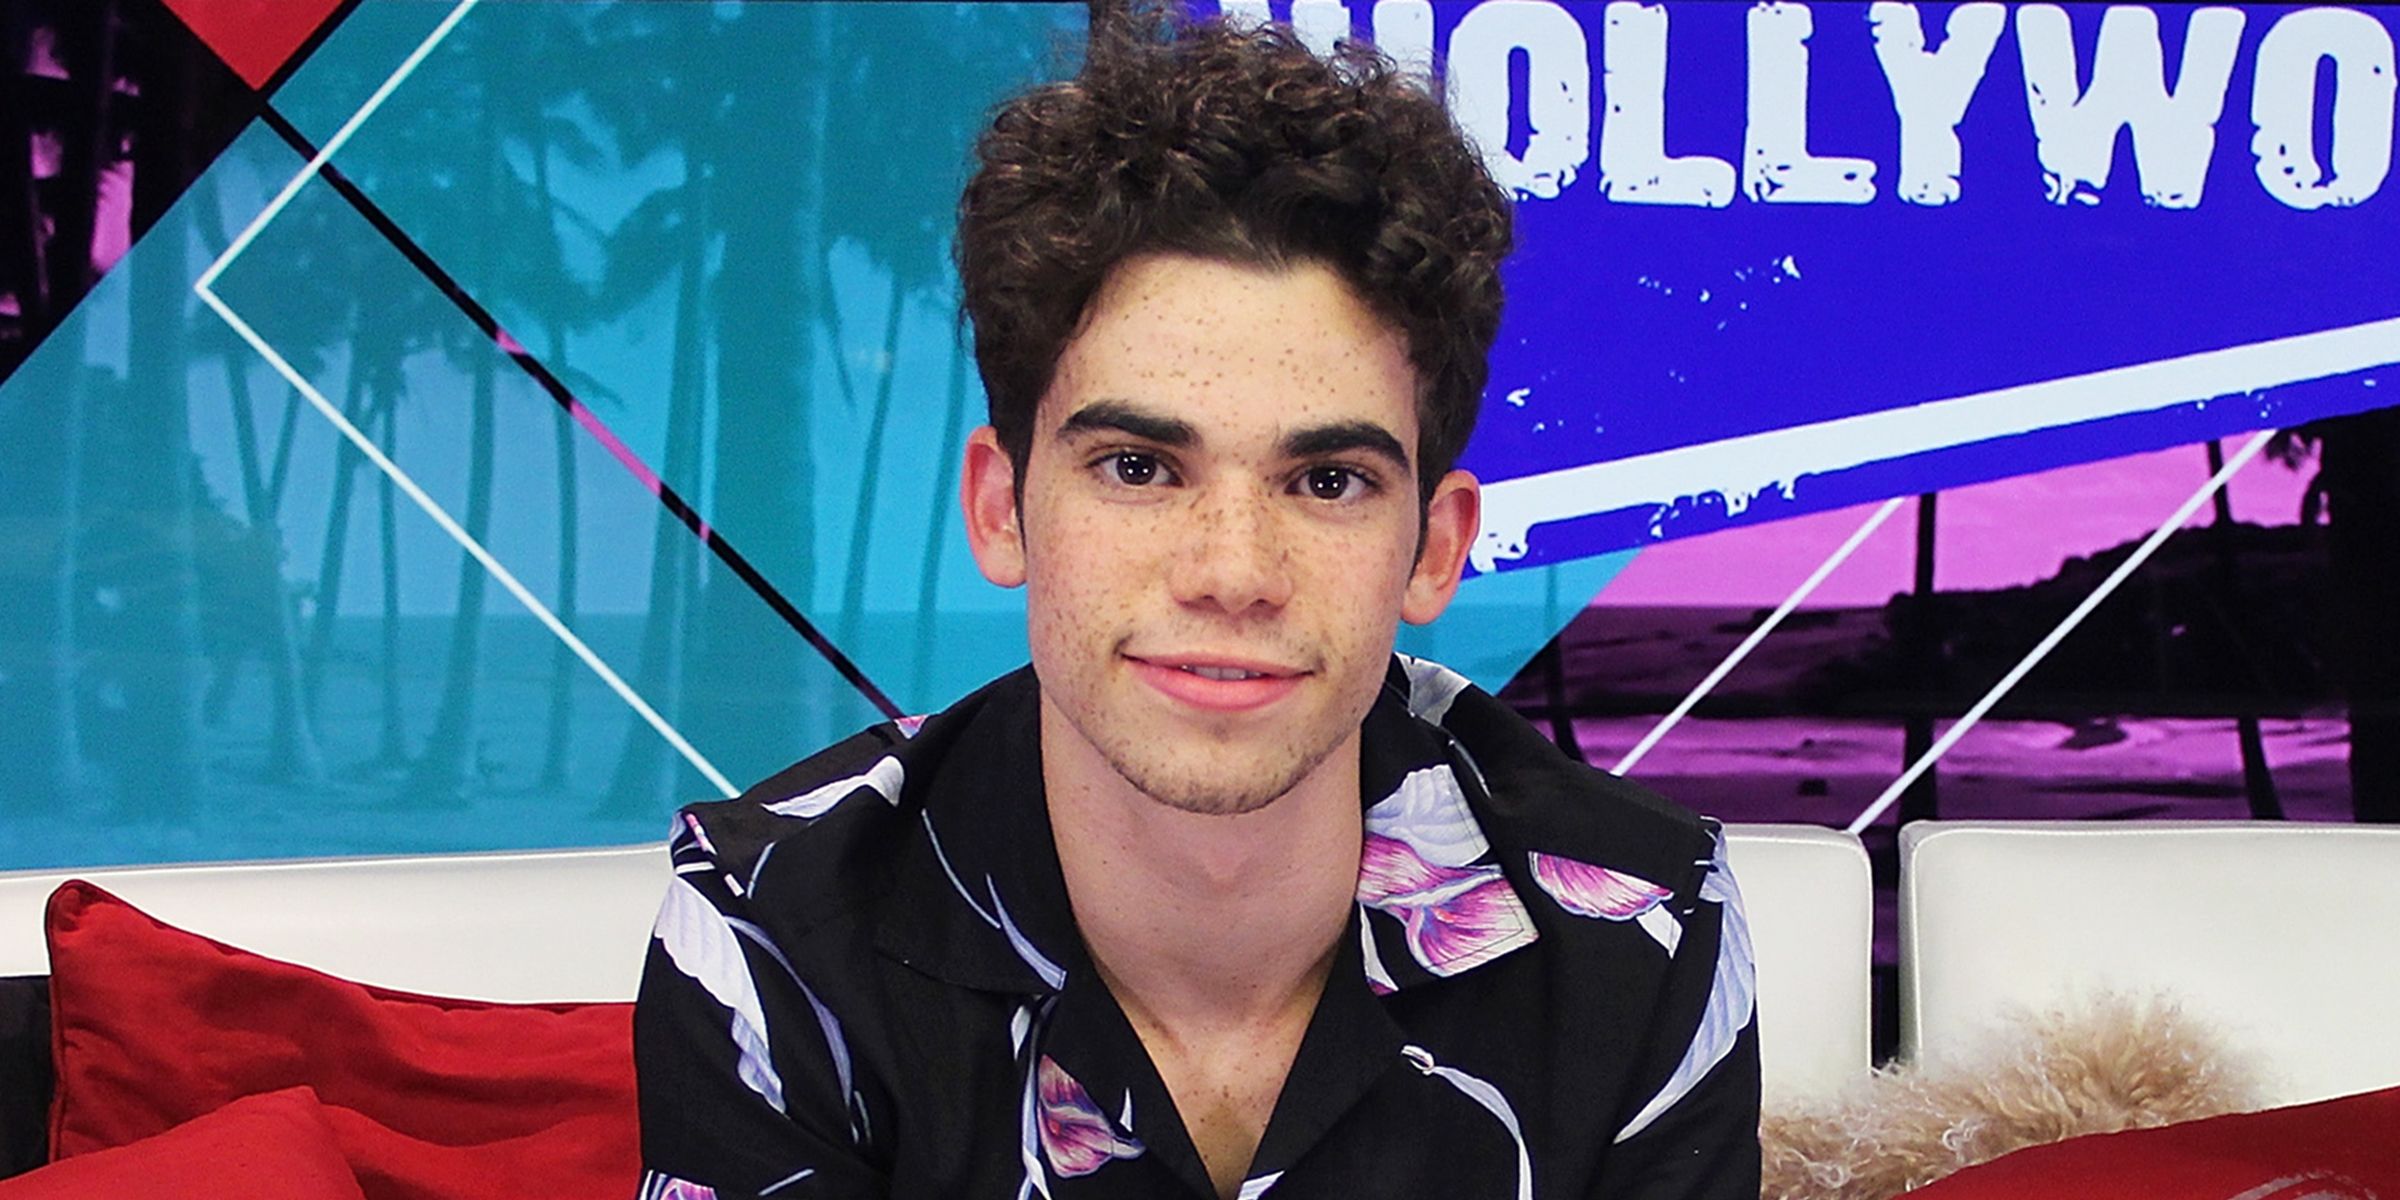 Cameron Boyce's dad shares photo taken hours before actor's death